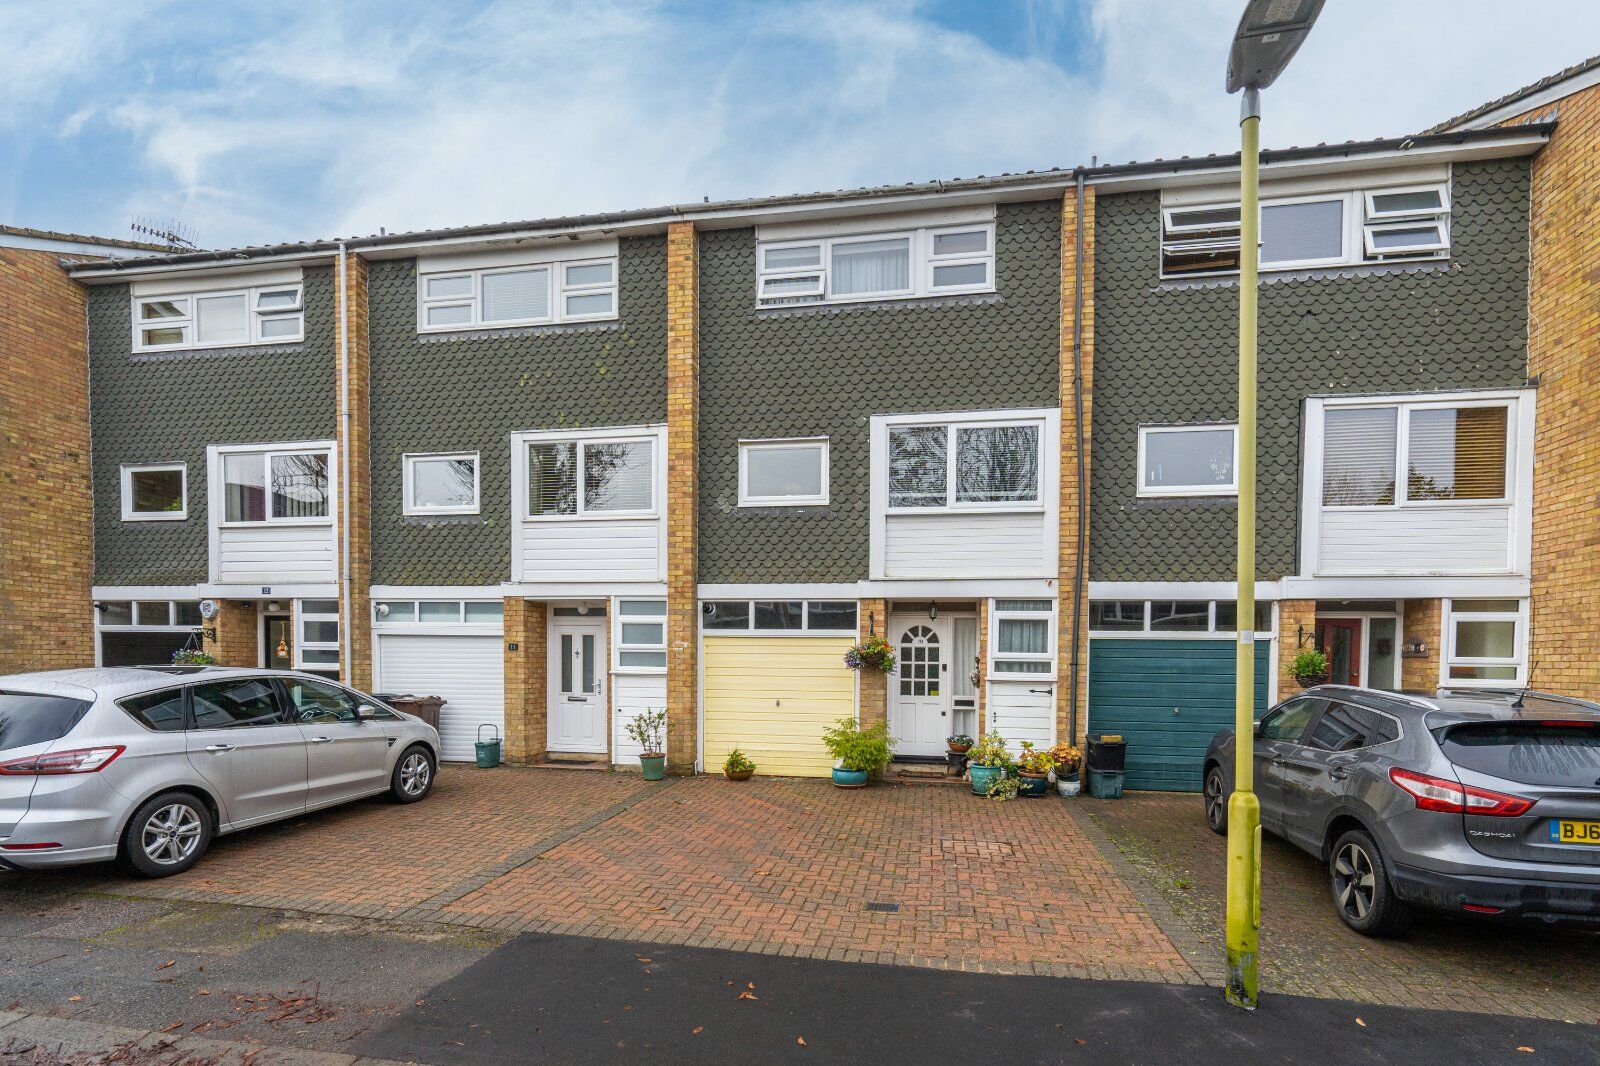 3 bedroom mid terraced house for sale Haddon Court, Shakespeare Road, AL5, main image